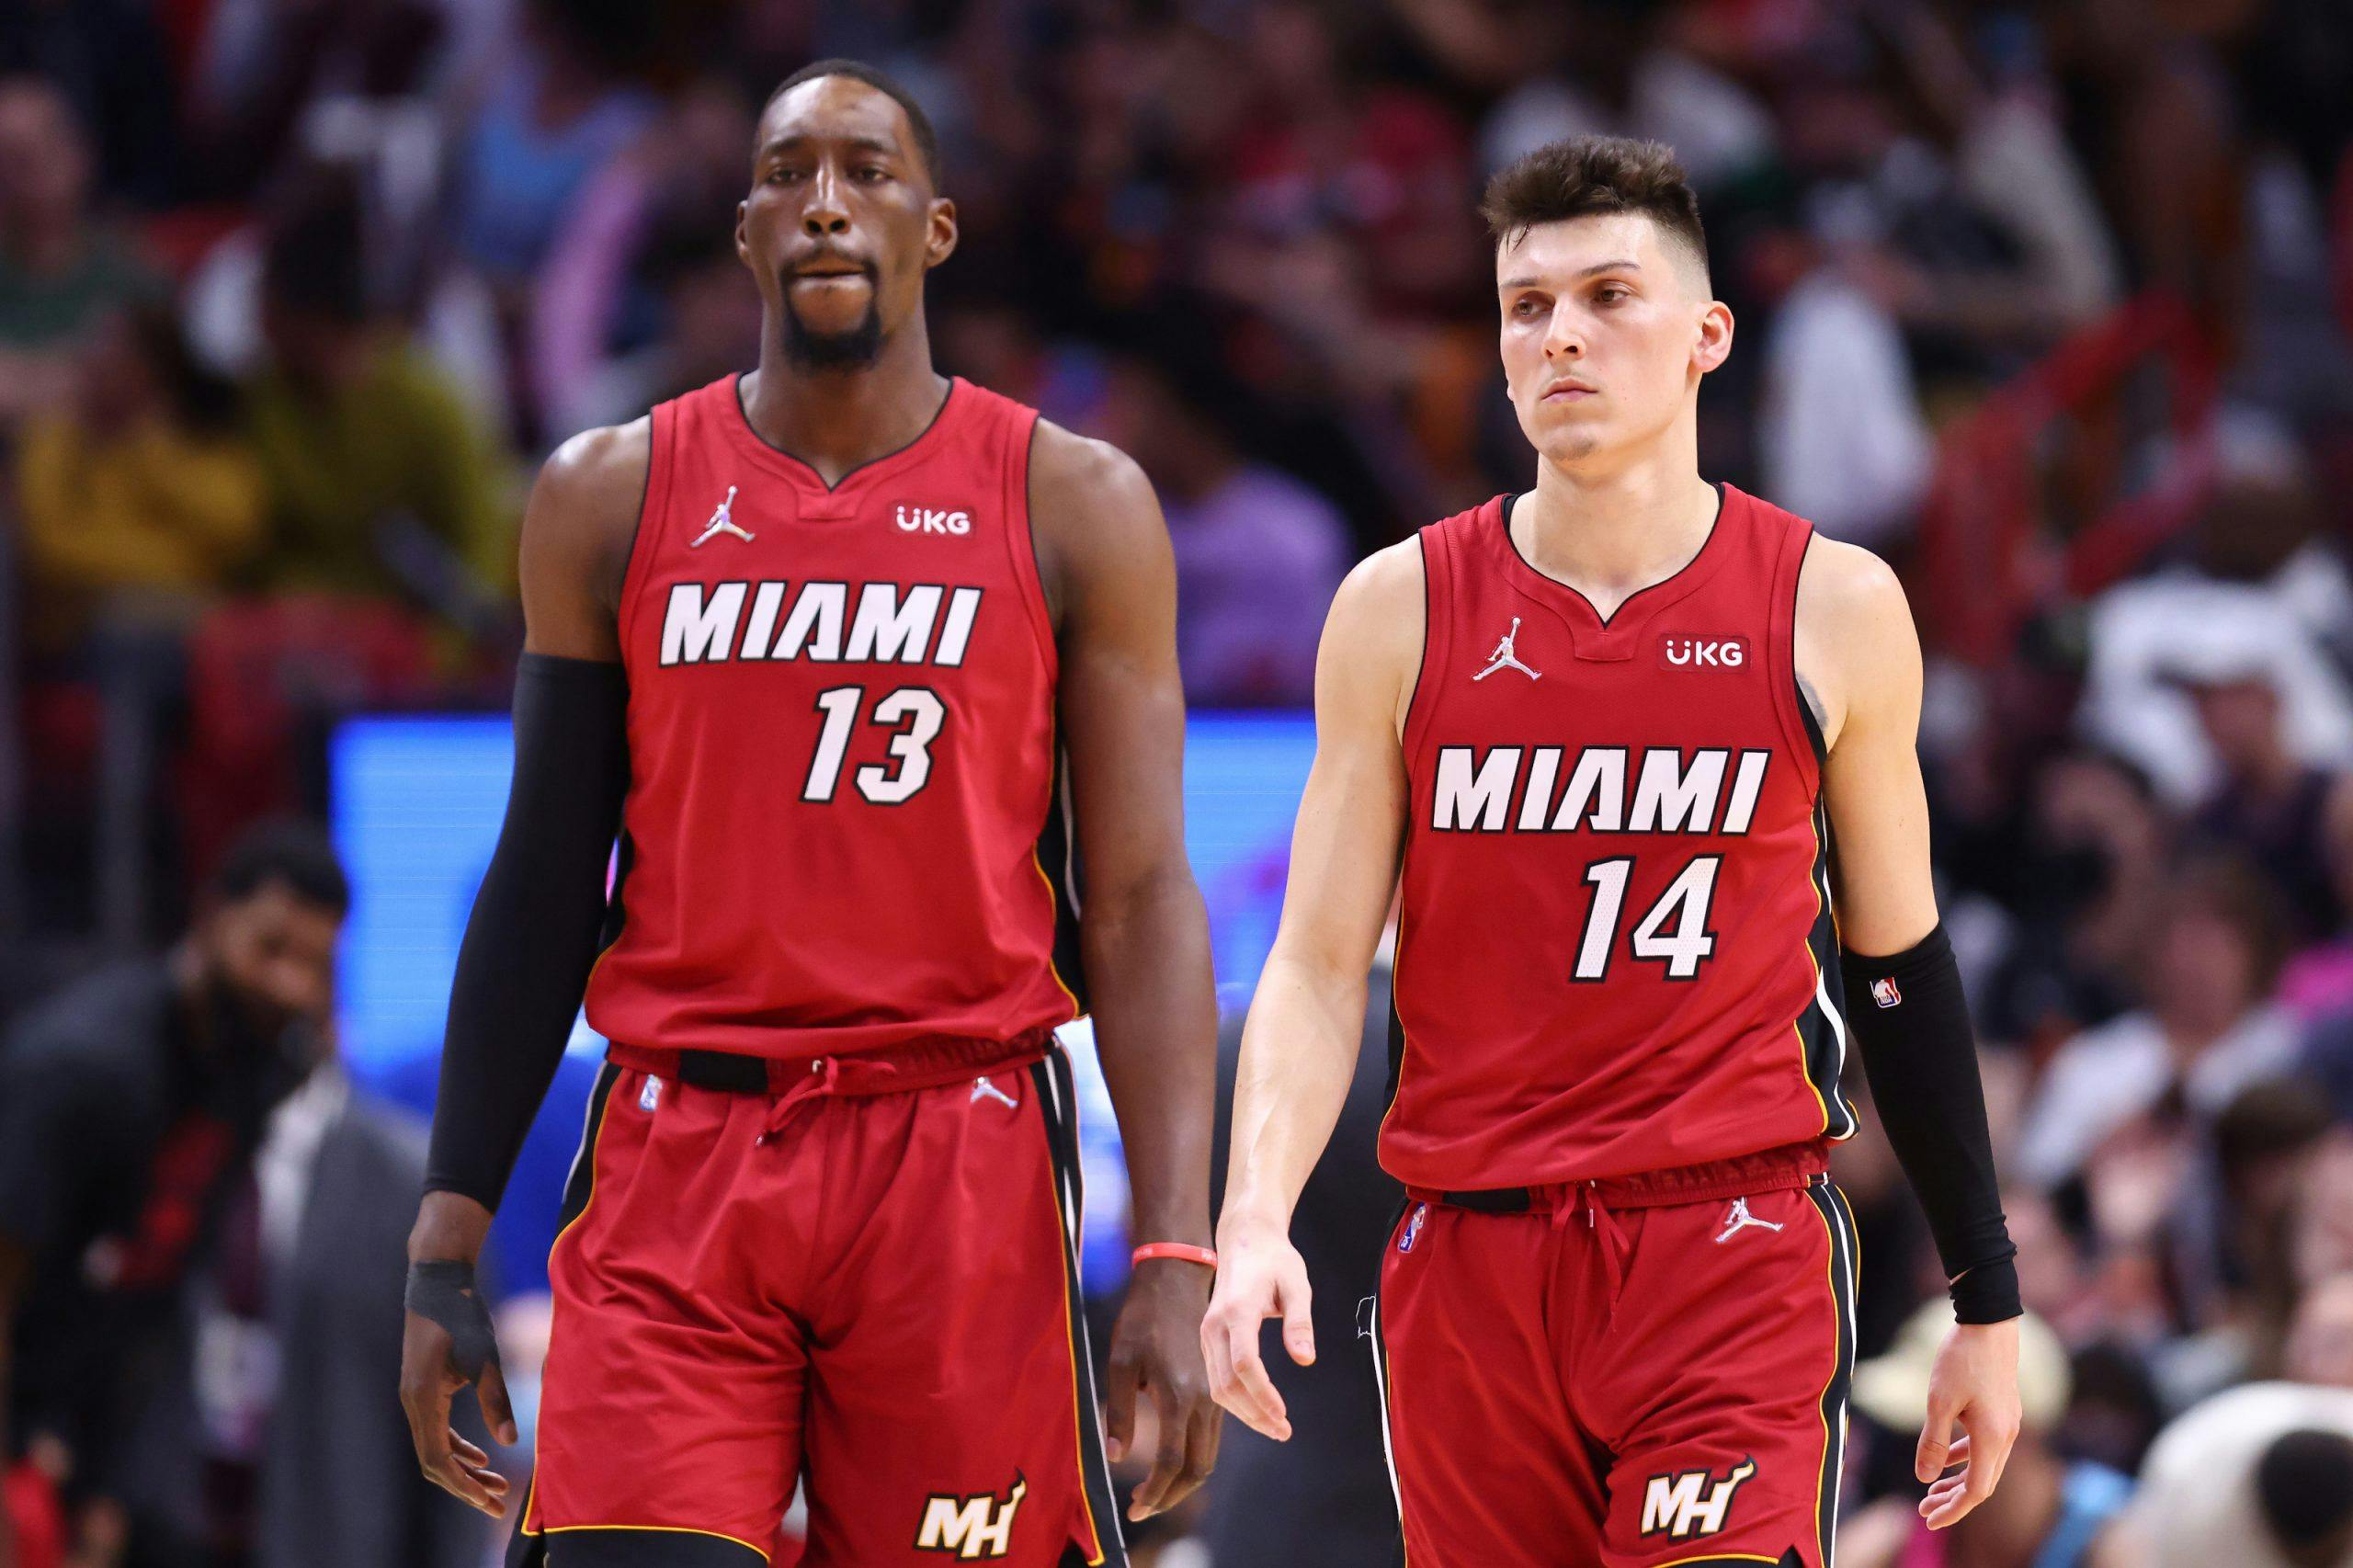 Season Preview: Do The Heat Have Another NBA Finals Run Within Them?